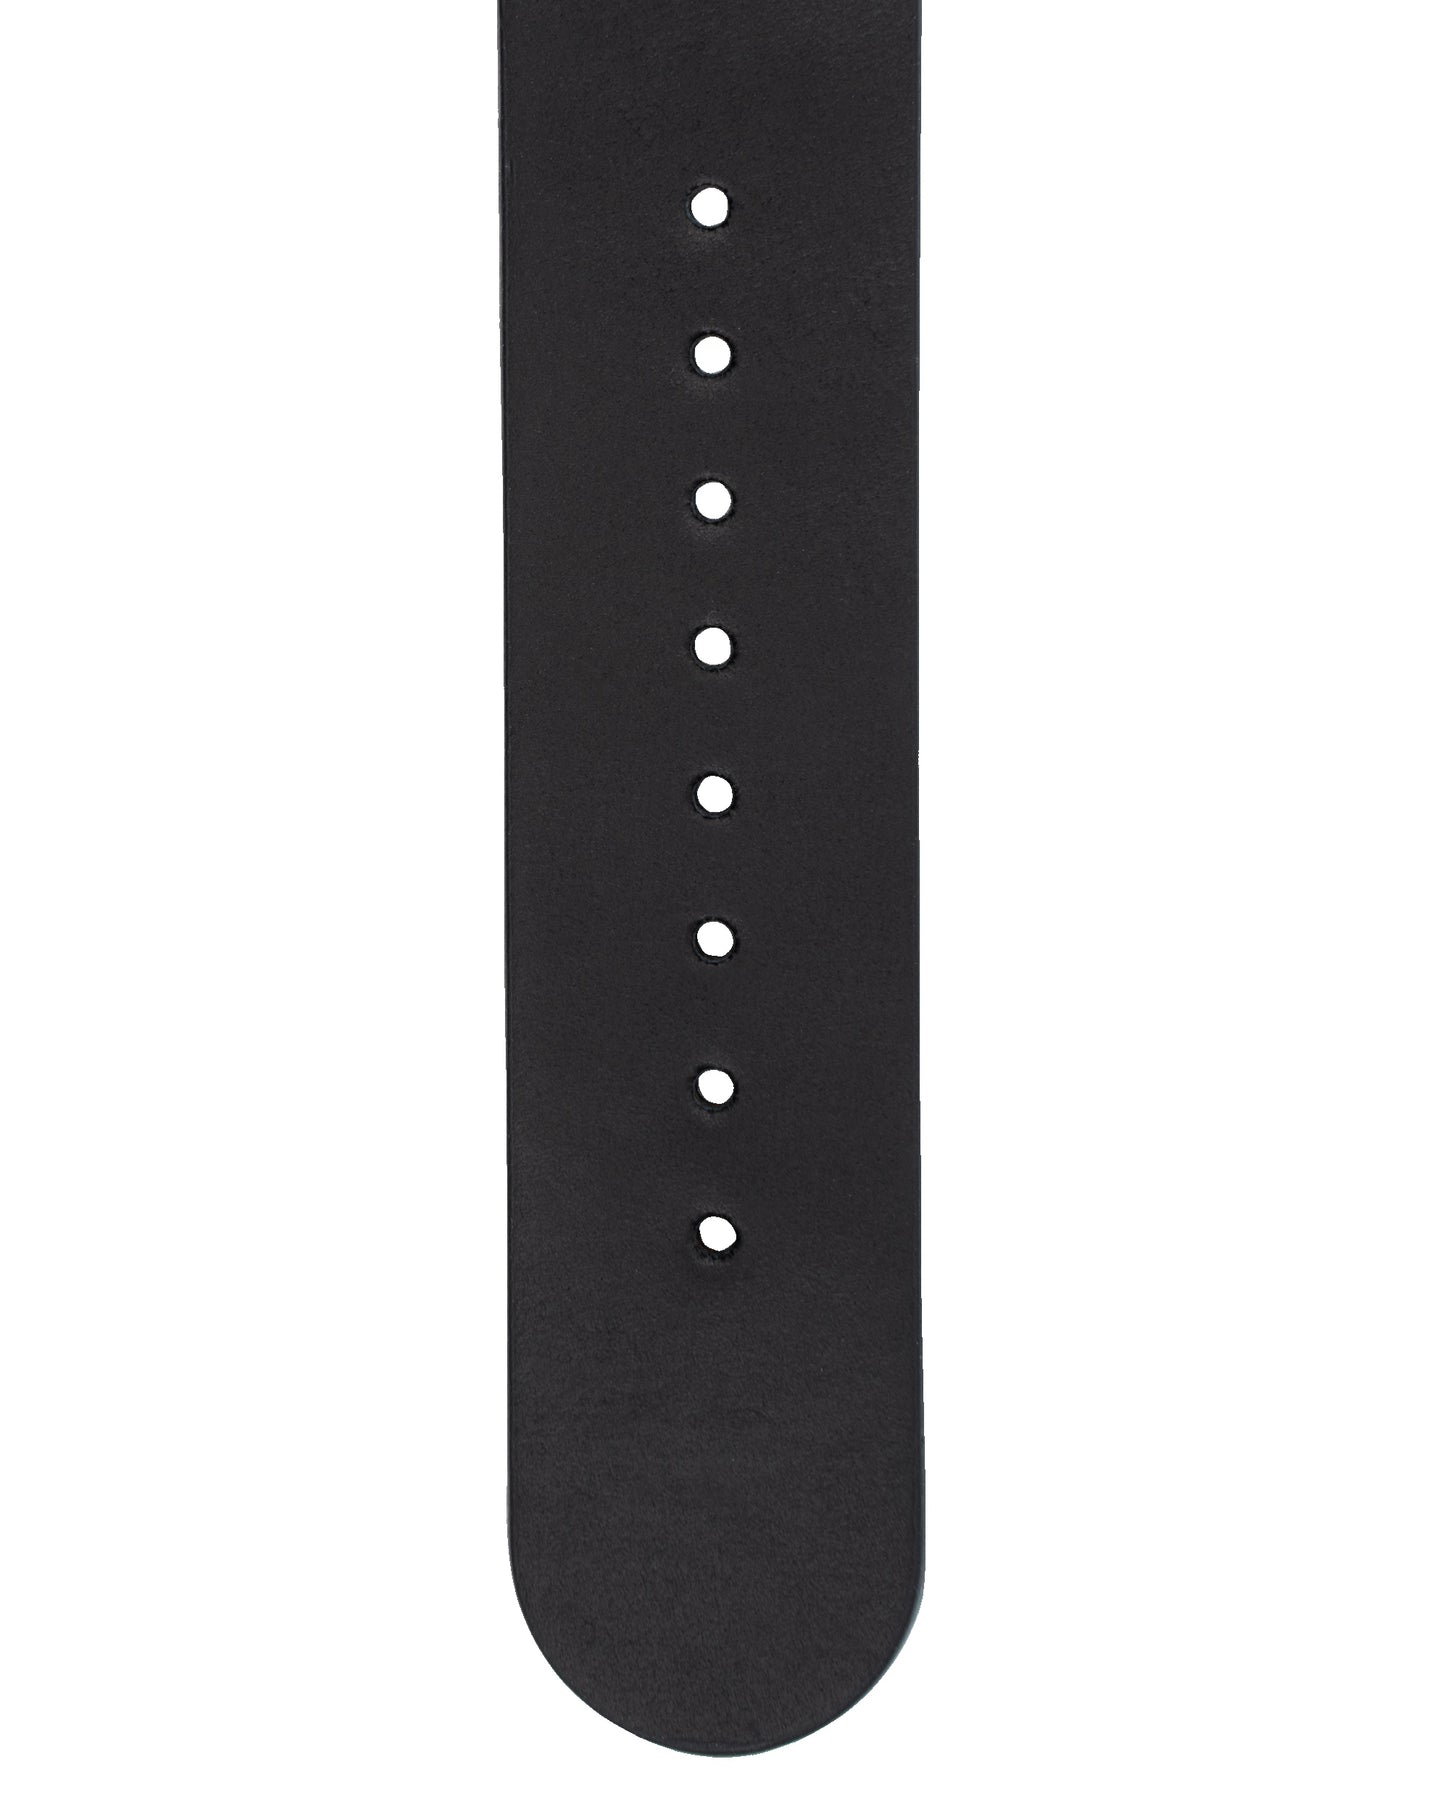 Rubber Watch Straps | Black Rubber Watch Bands | NORM Denmark